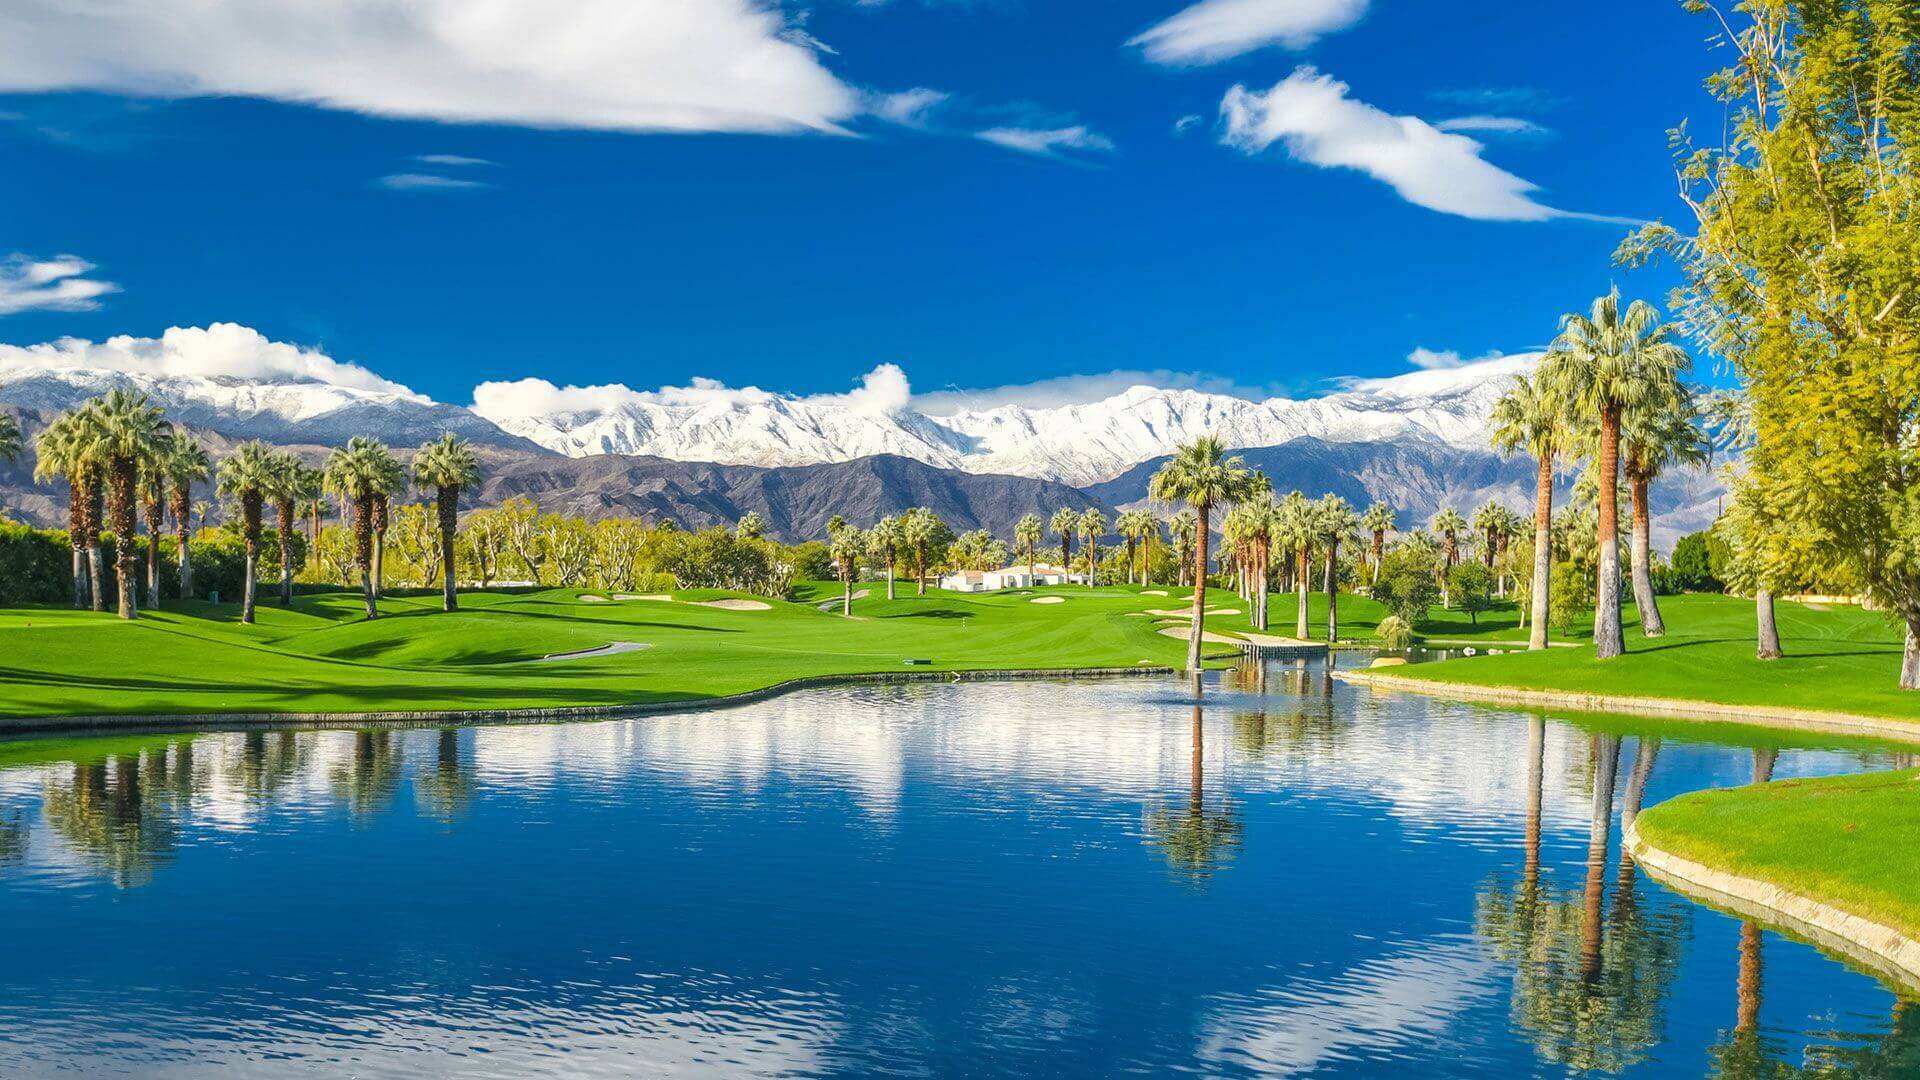 19. Greater Palm Springs, California